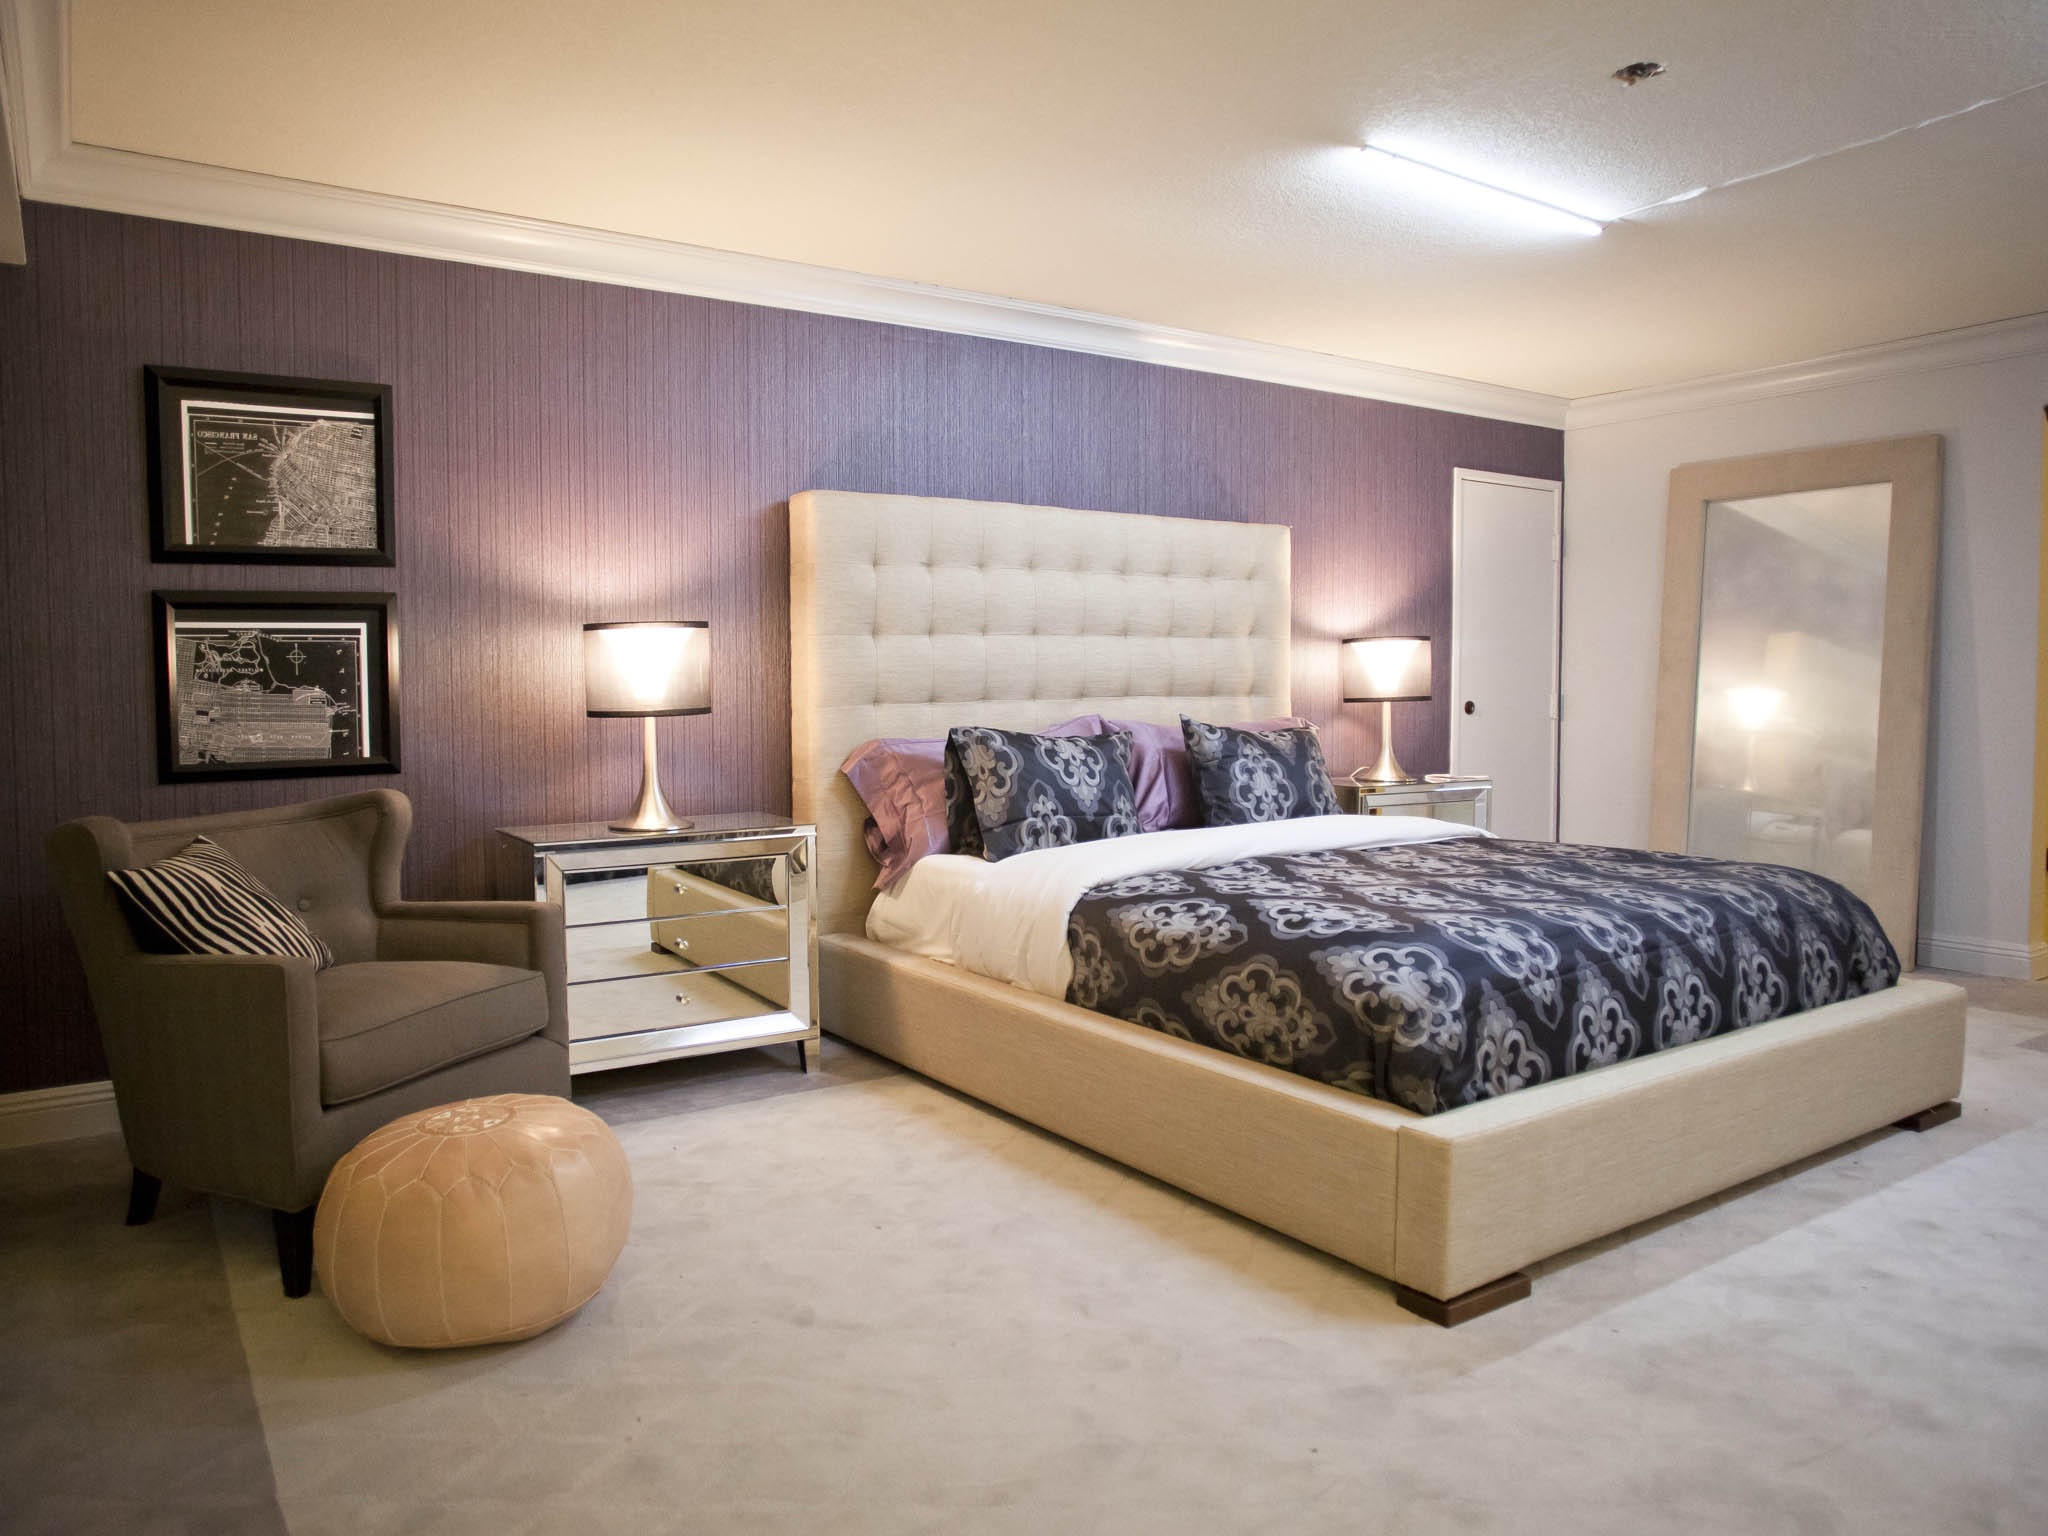 Purple Paint For Bedroom
 20 Lovely Bedroom Paint And Color Ideas